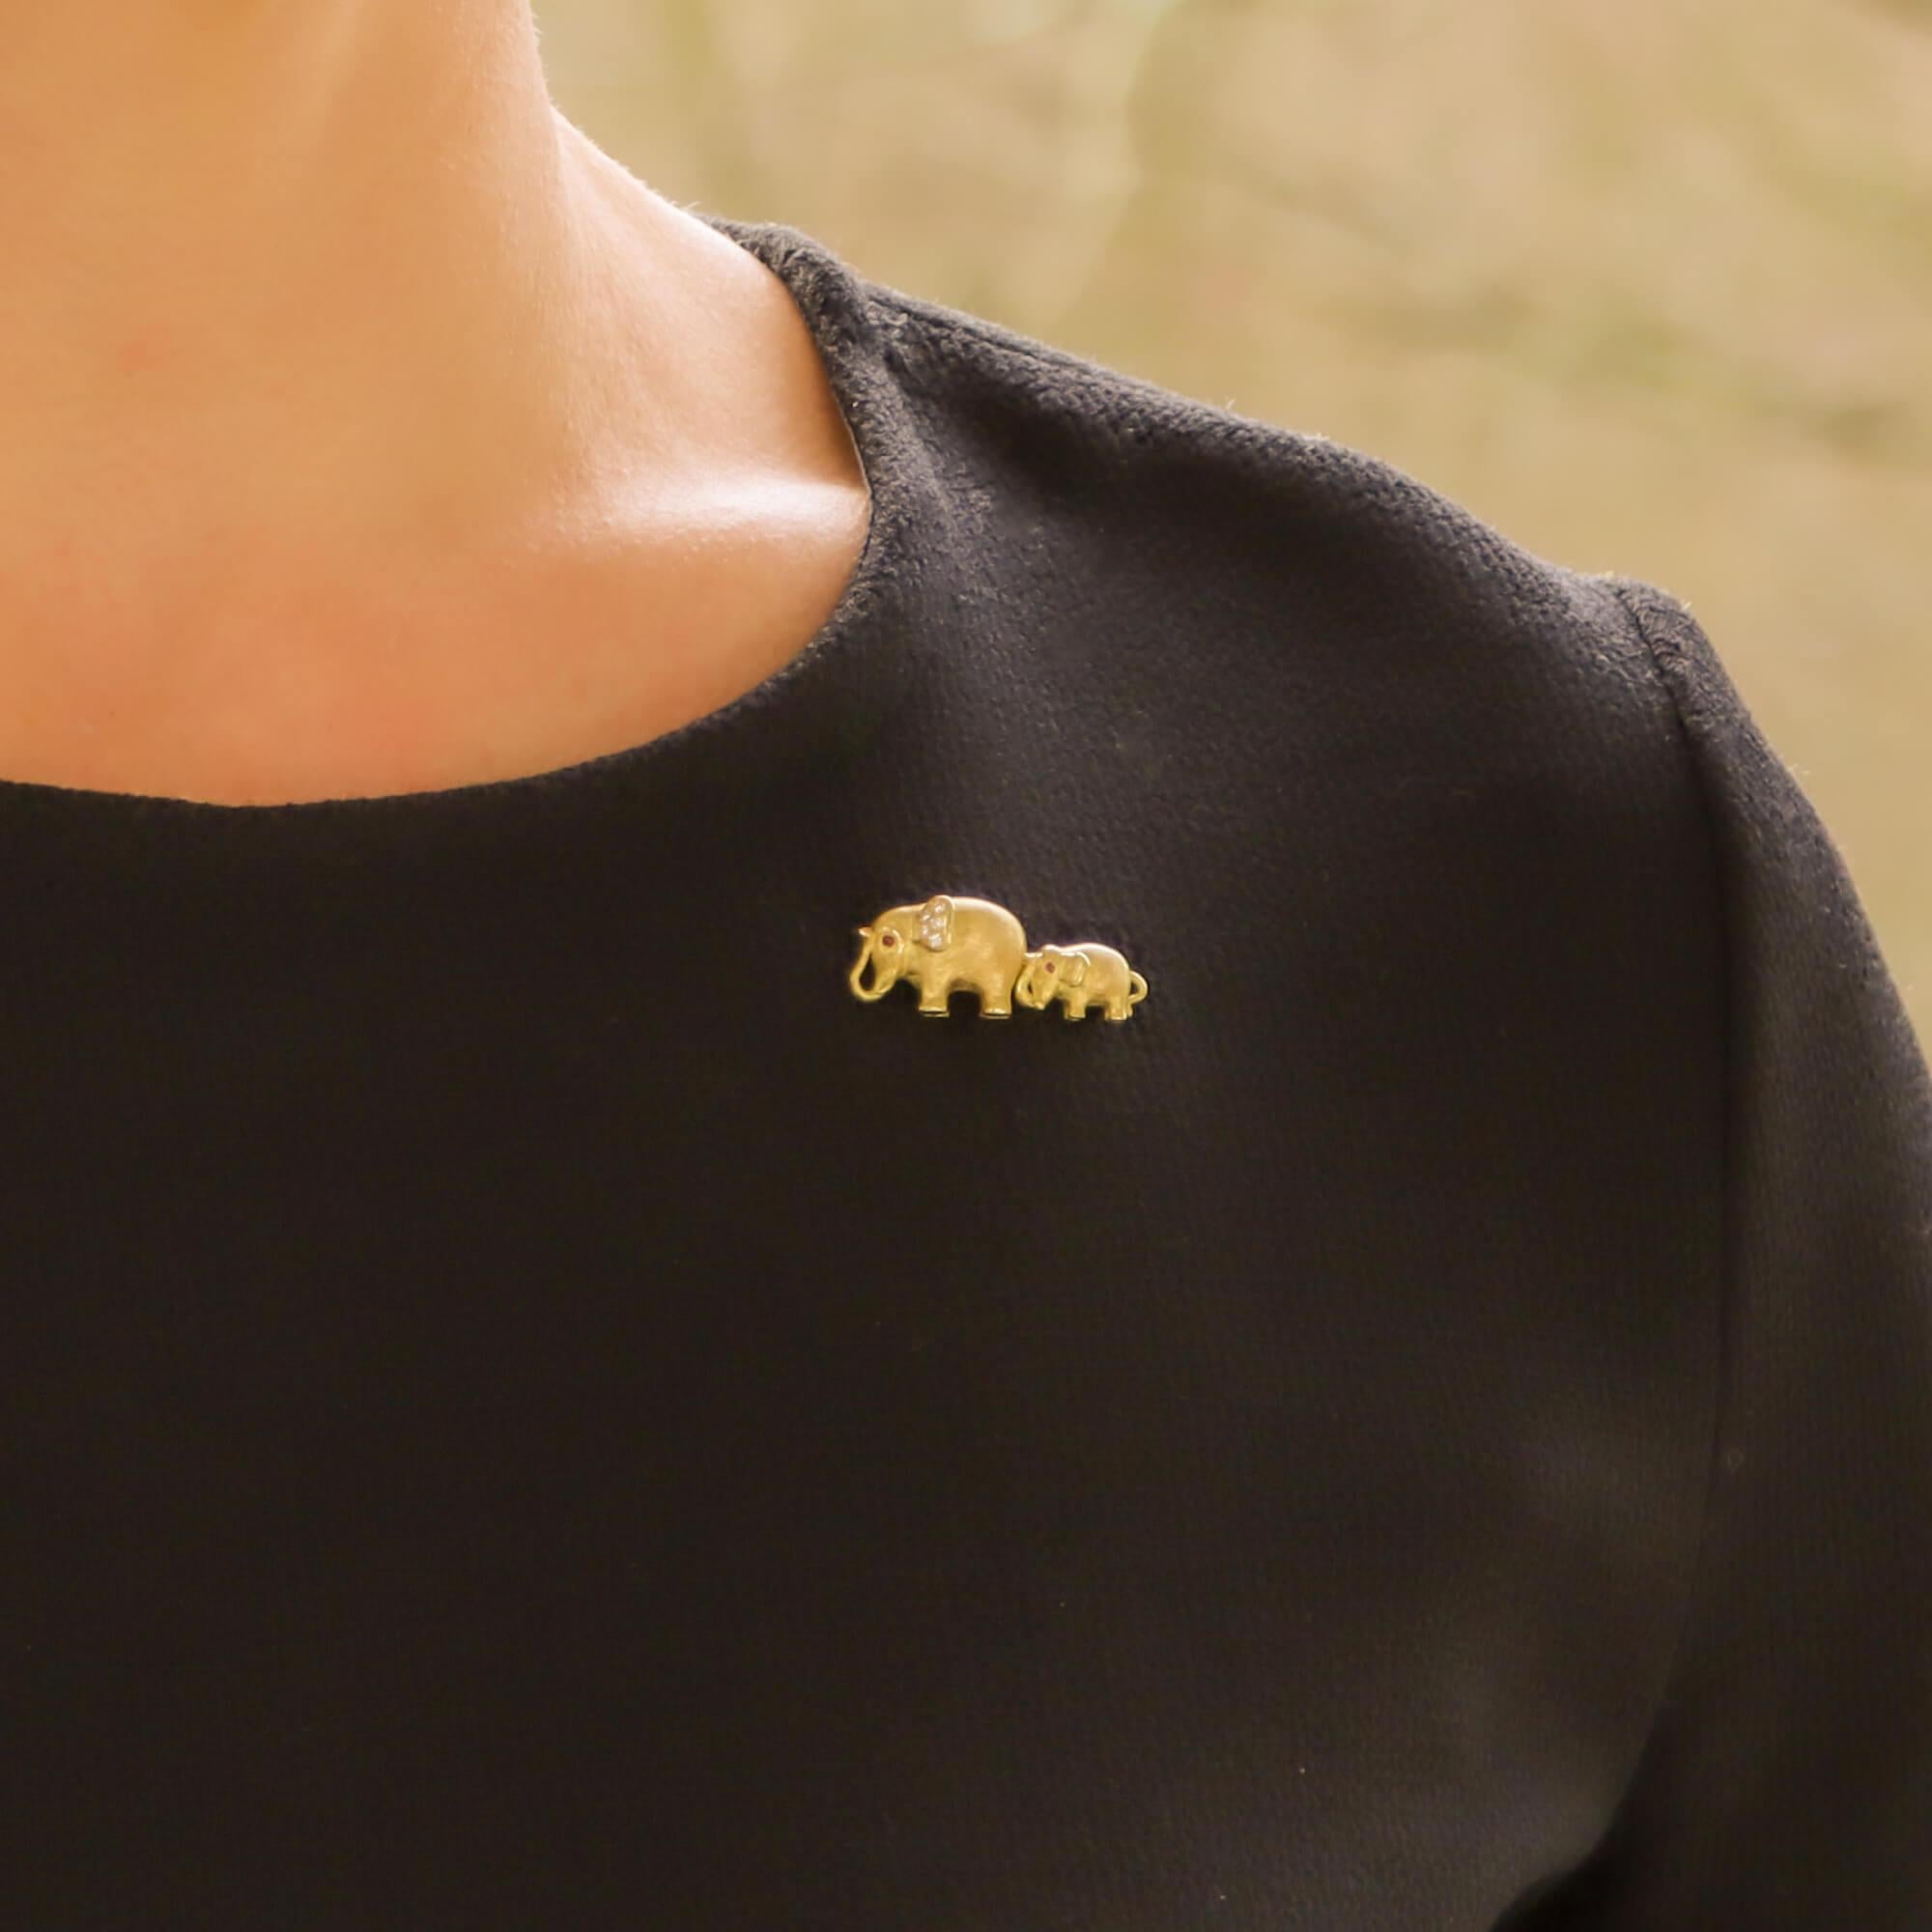 A lovely ruby and diamond Mother and baby elephant brooch set in 18k yellow gold.

The brooch depicts a mother and baby elephant connected to one another by tail and trunk. Both elephants are made of 18k yellow gold and have both been beautifully